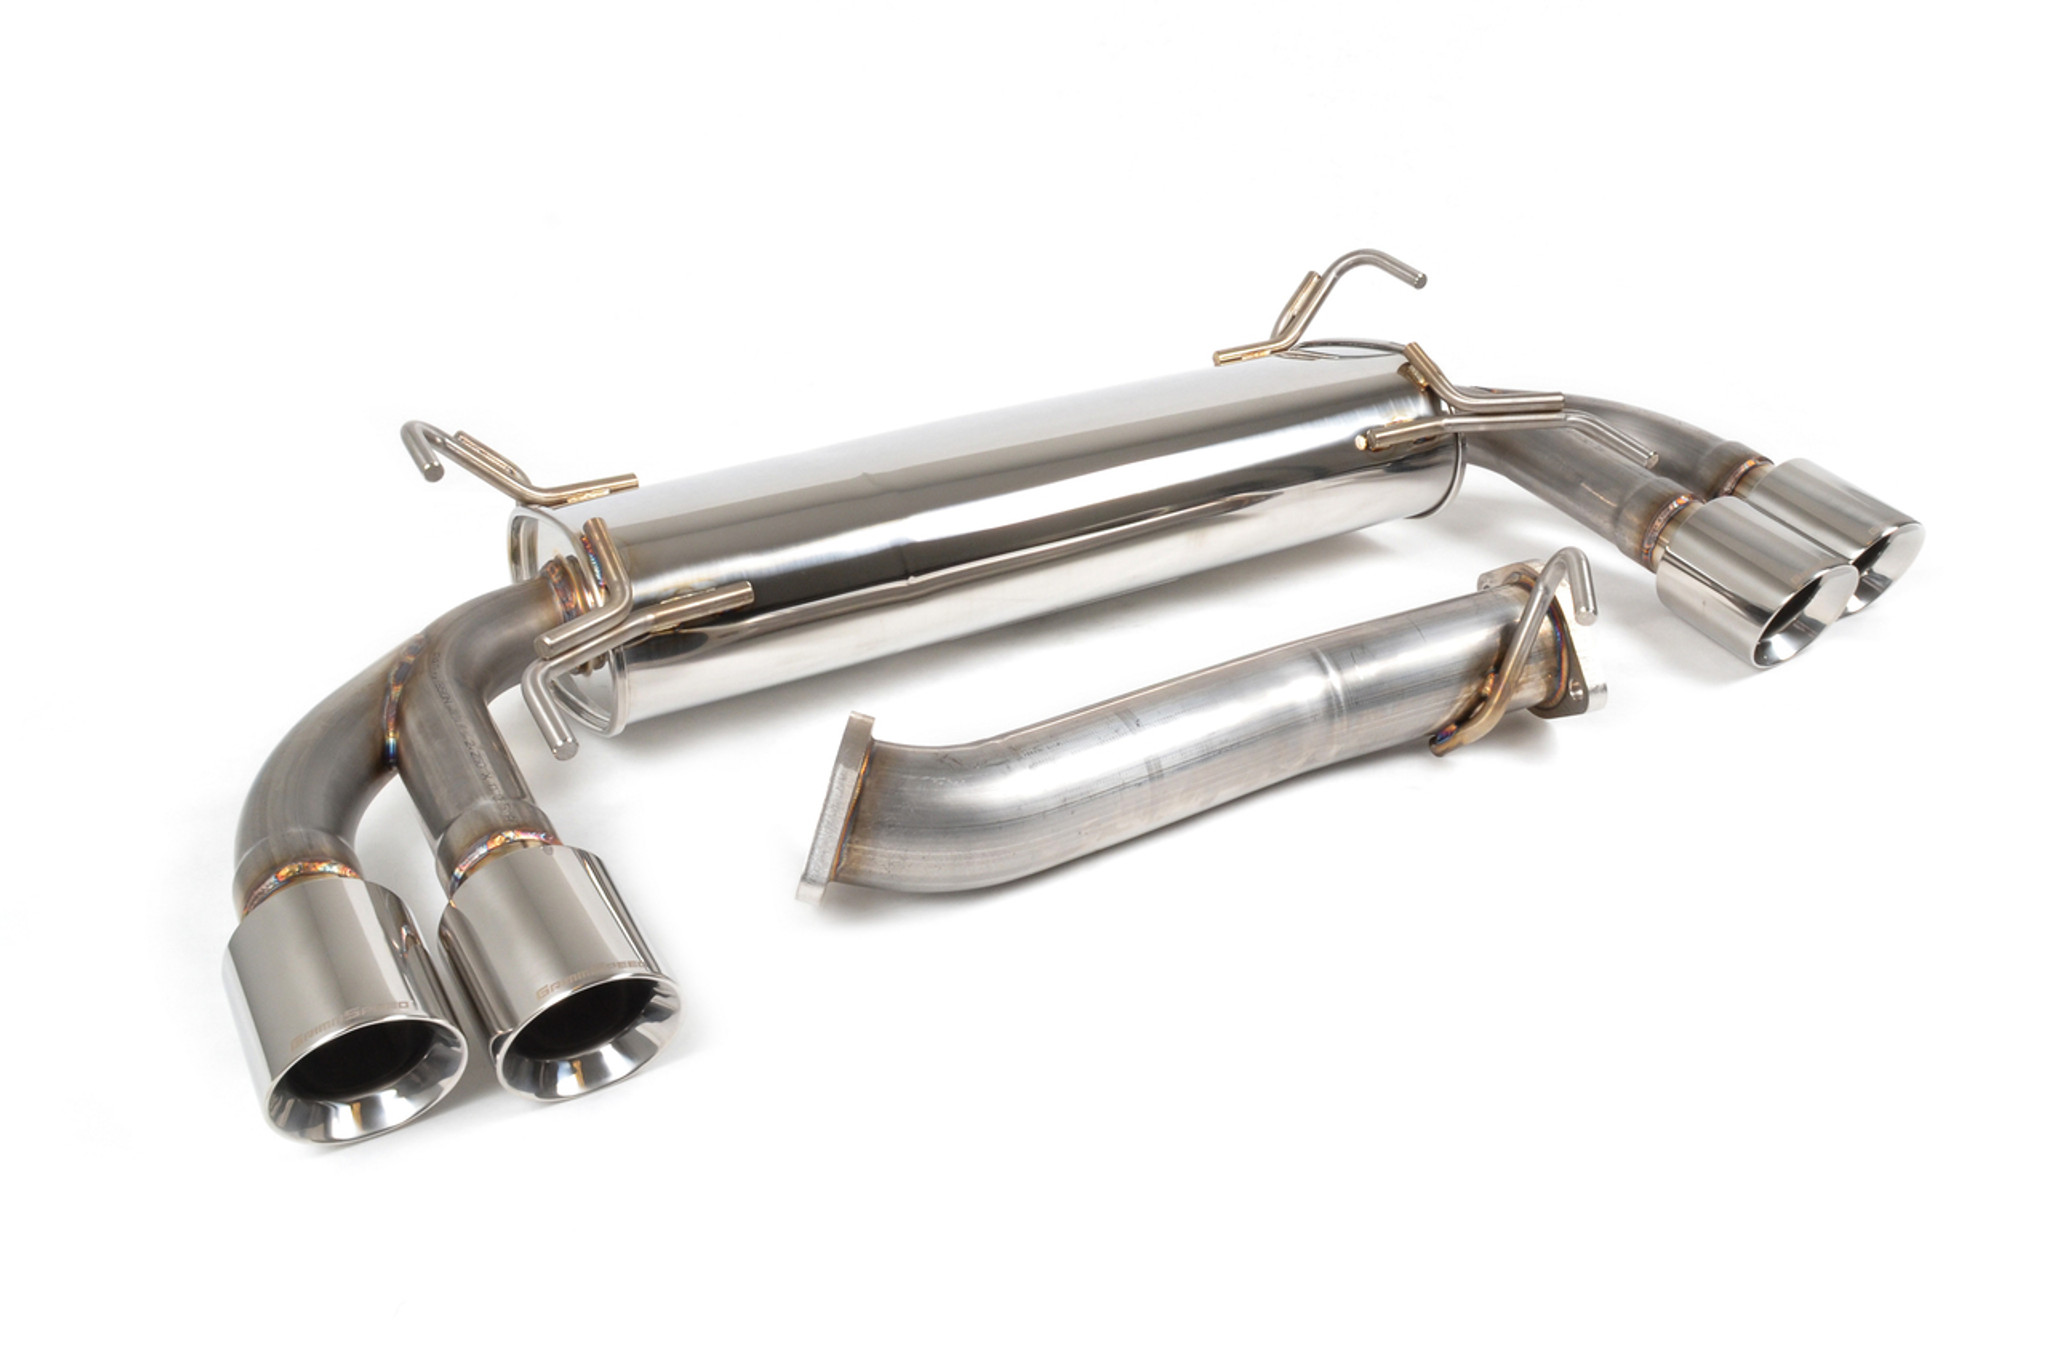 Resonated Vs Non-Resonated Exhaust Systems. What's The Difference